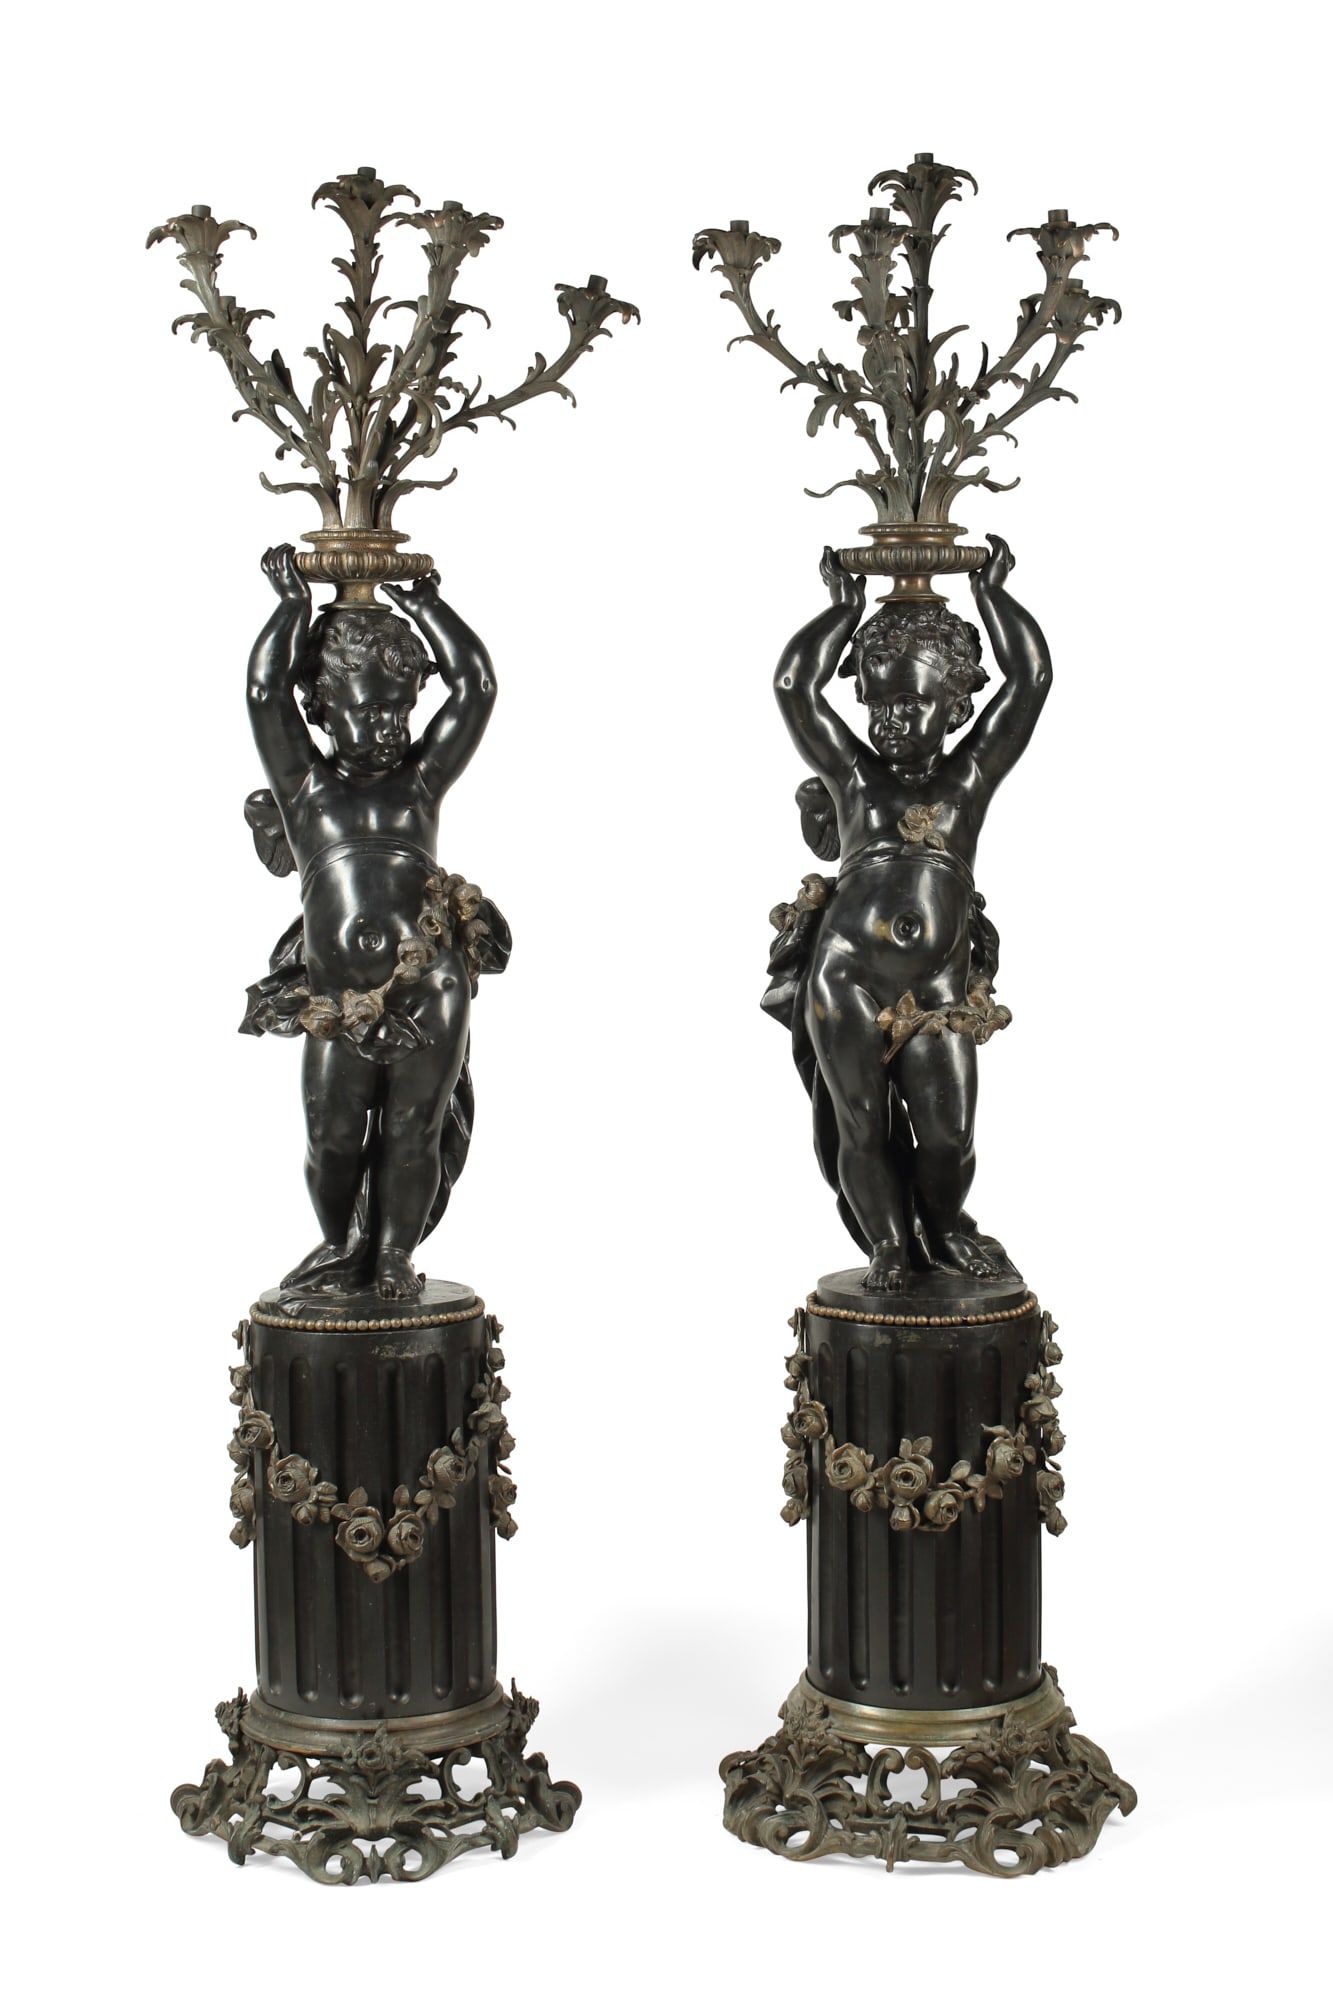 A PAIR OF FRENCH BRONZE FIGURAL 2fb35d4